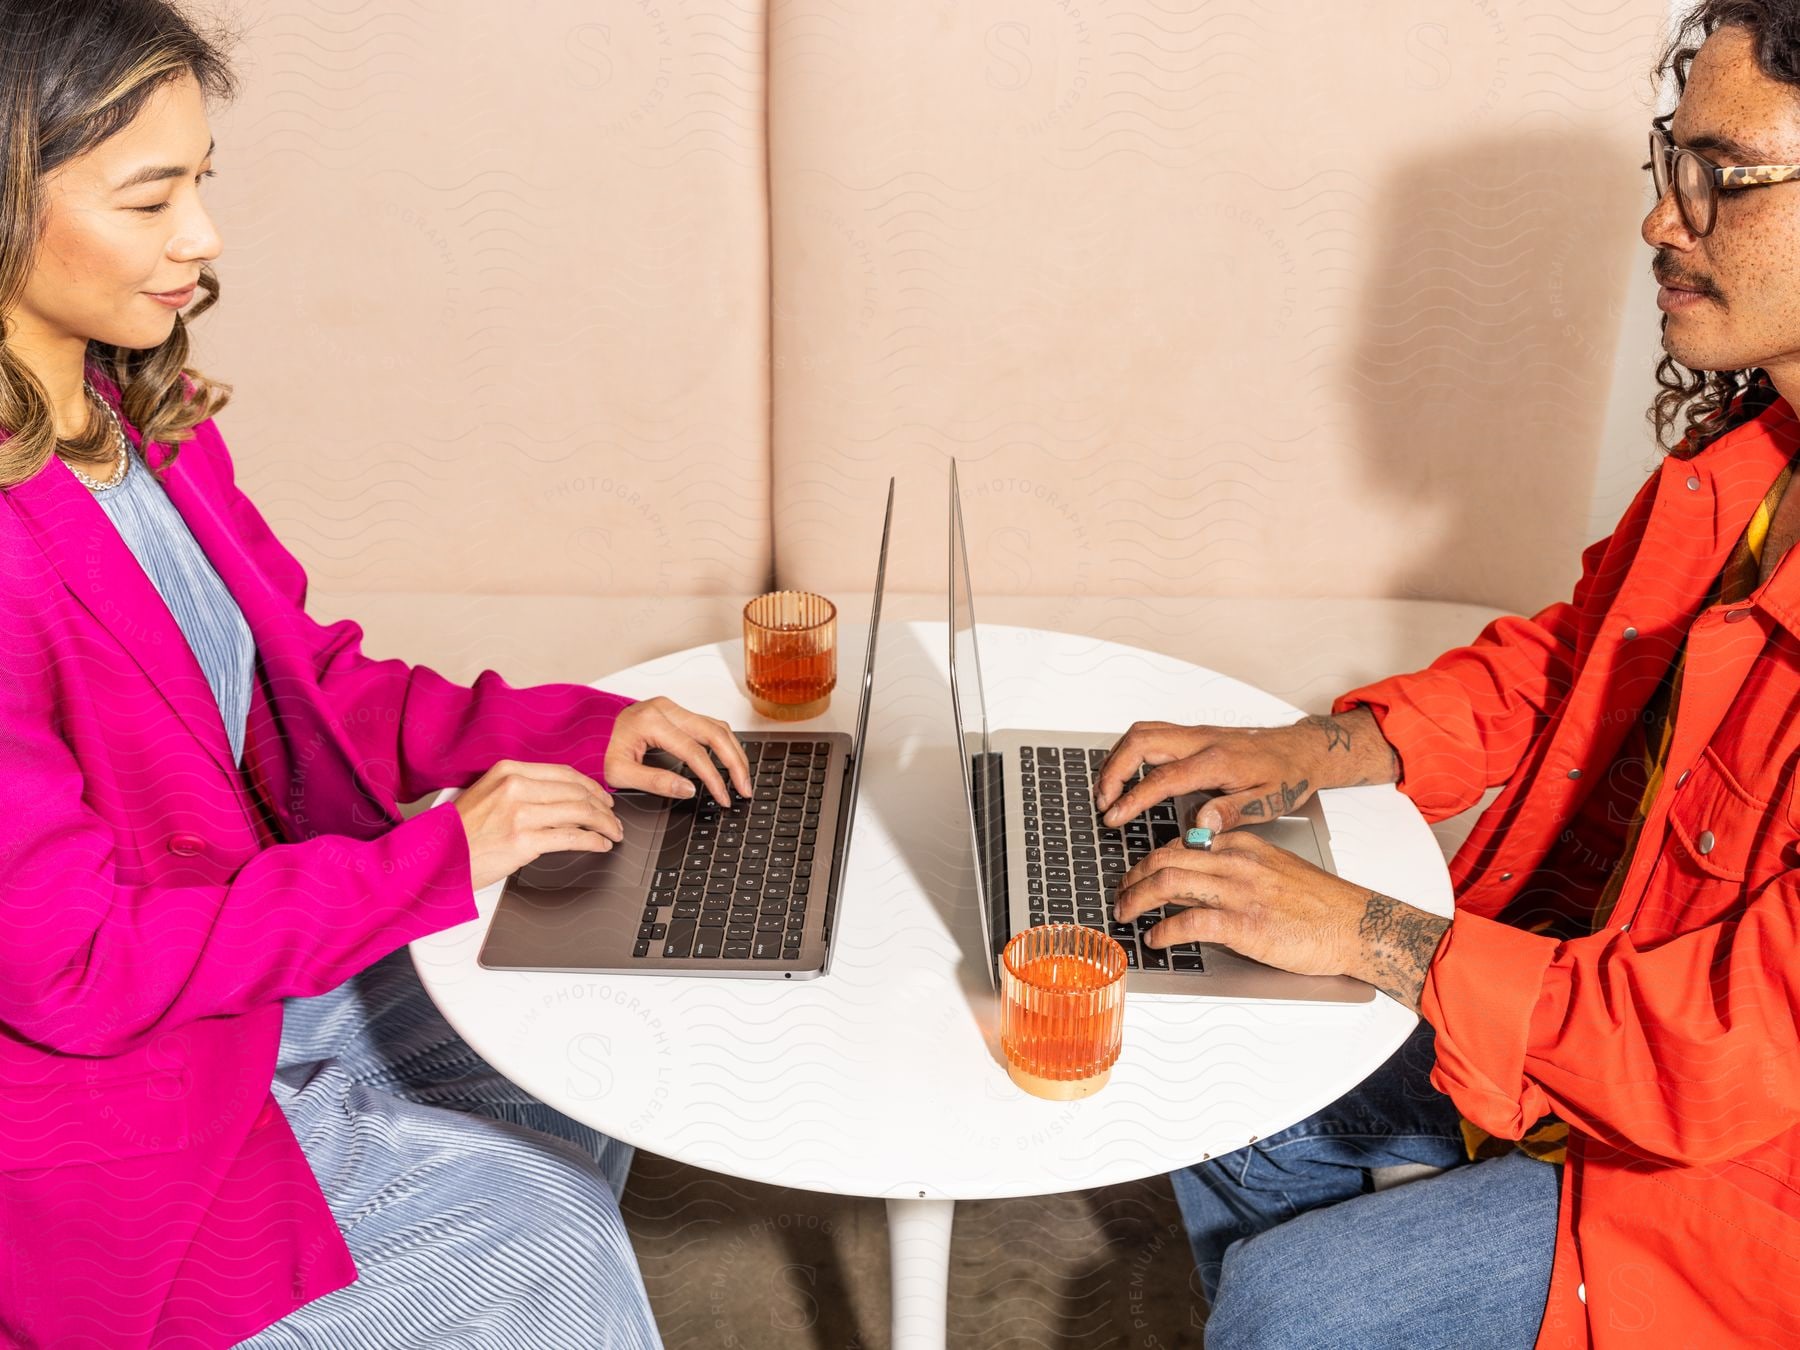 Stock photo of a man and a woman sitting at a table typing on laptops.